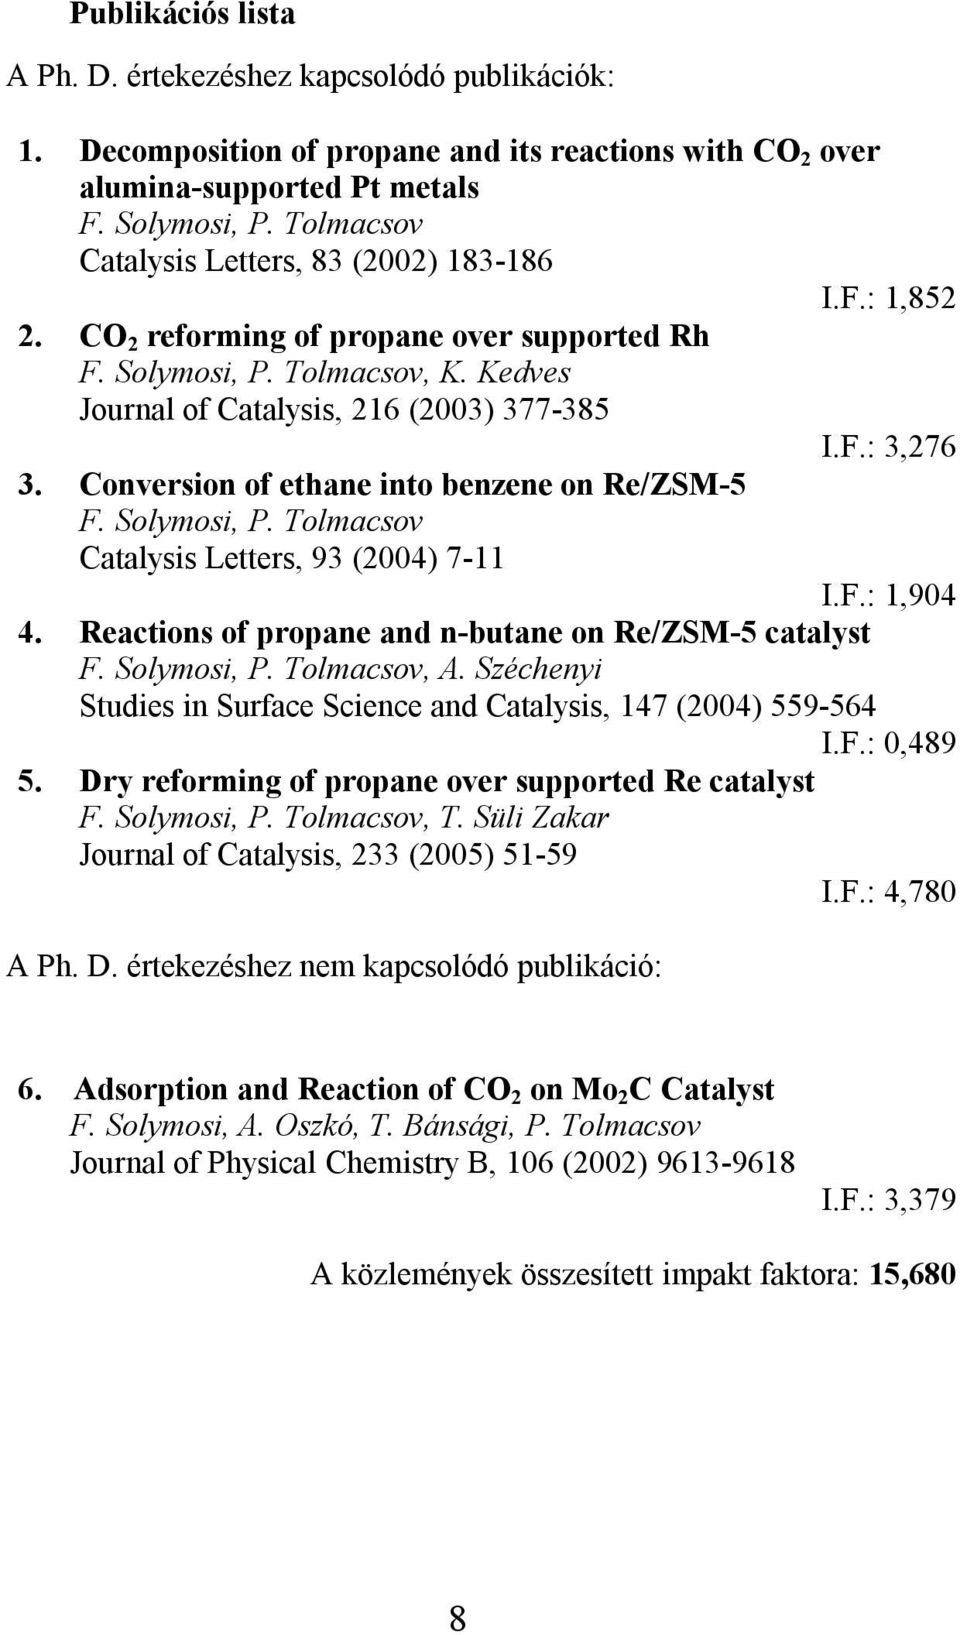 Conversion of ethane into benzene on Re/ZSM-5 F. Solymosi, P. Tolmacsov Catalysis Letters, 93 (2004) 7-11 I.F.: 1,904 4. Reactions of propane and n-butane on Re/ZSM-5 catalyst F. Solymosi, P. Tolmacsov, A.